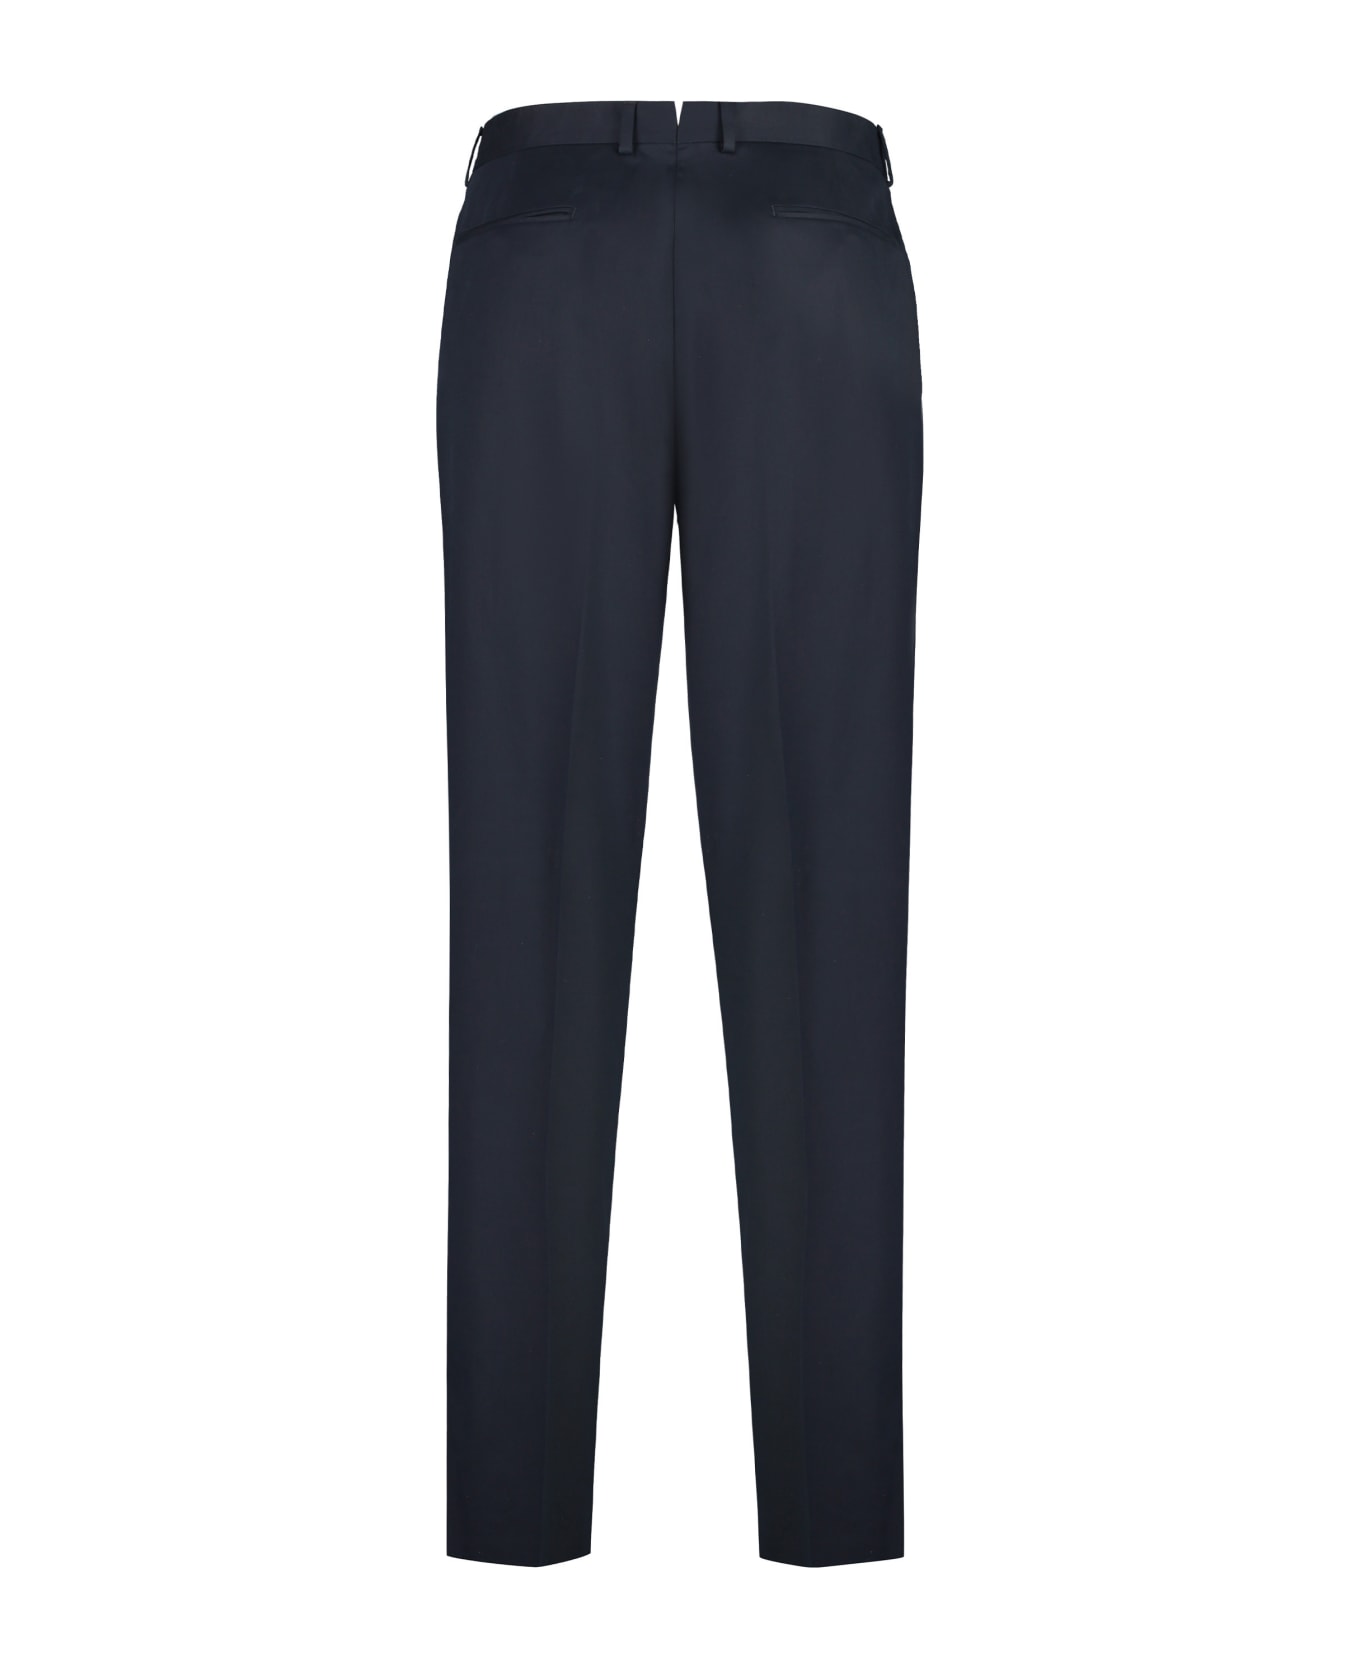 Zegna Stretch Cotton Chino Trousers - blue